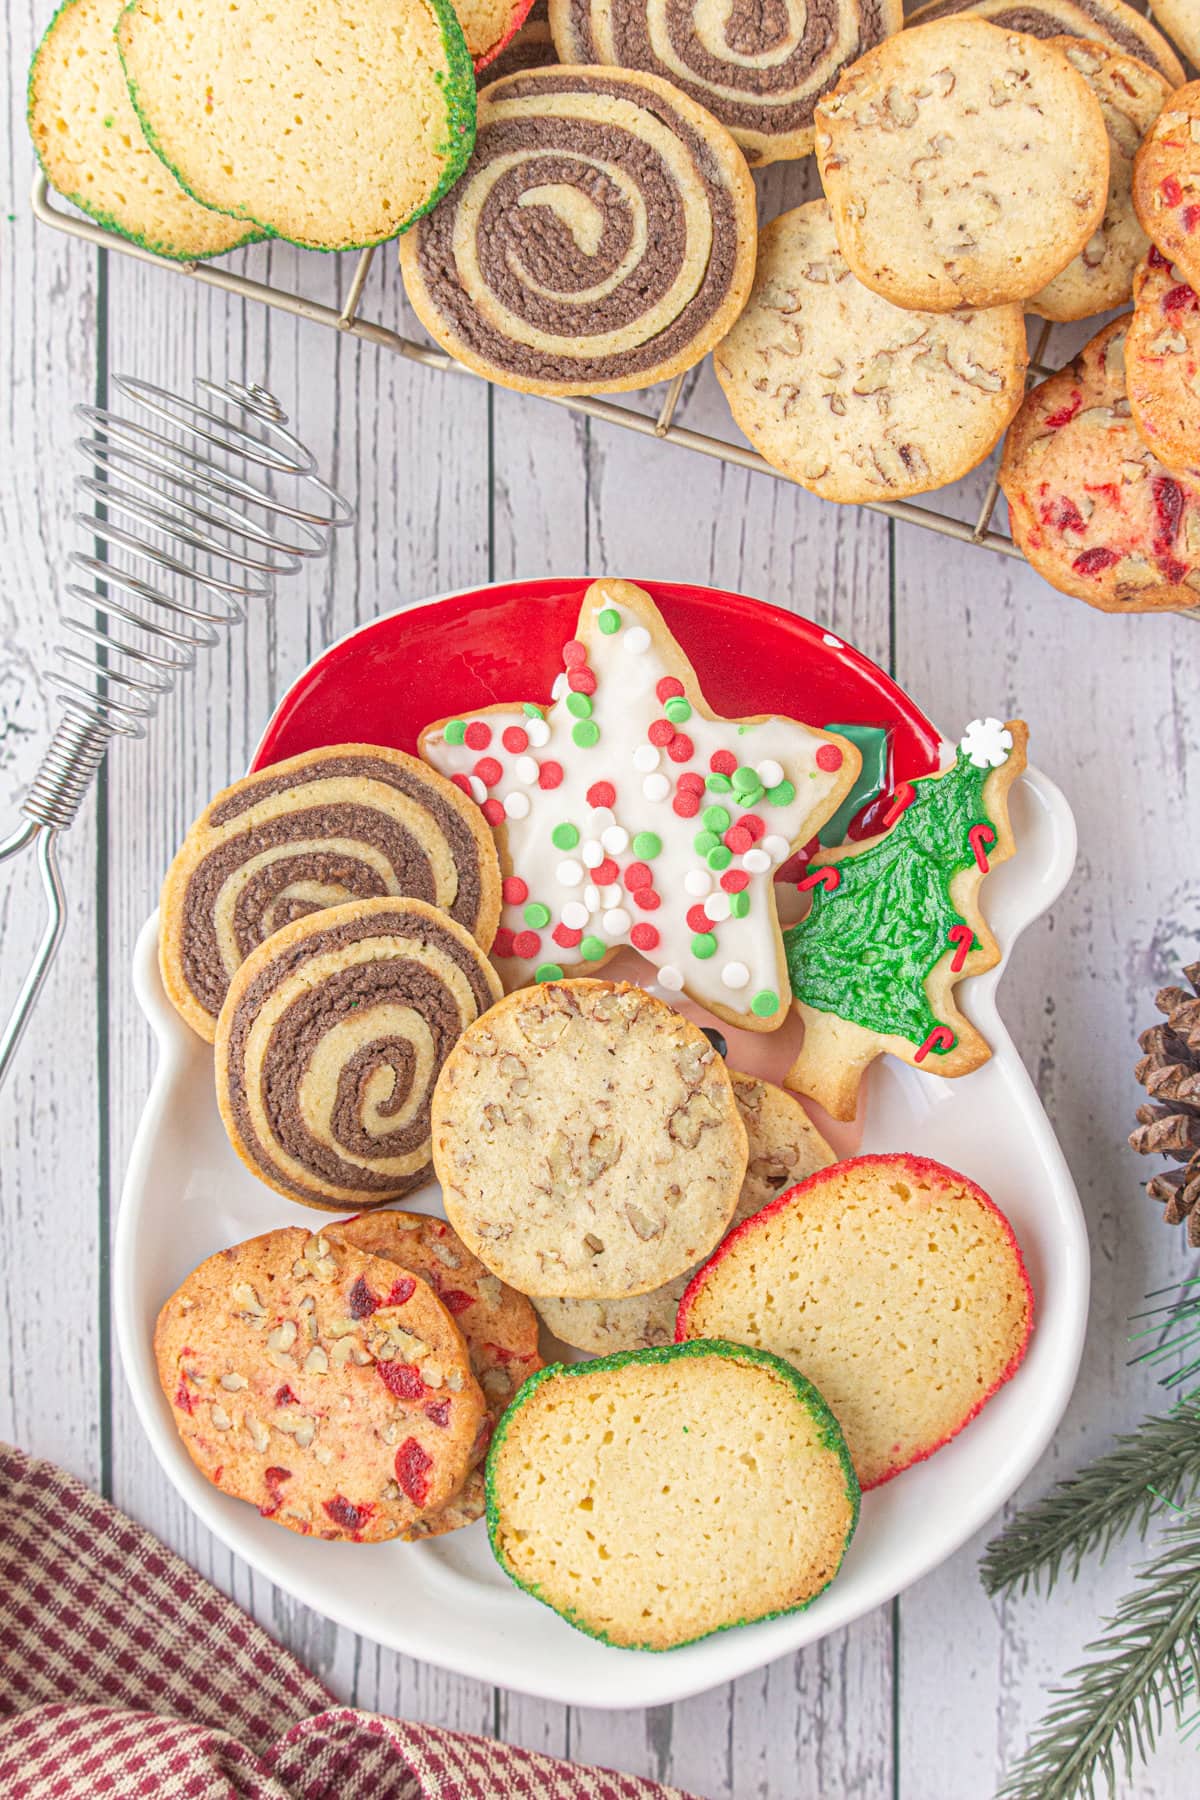 A plate full of holiday cookies.